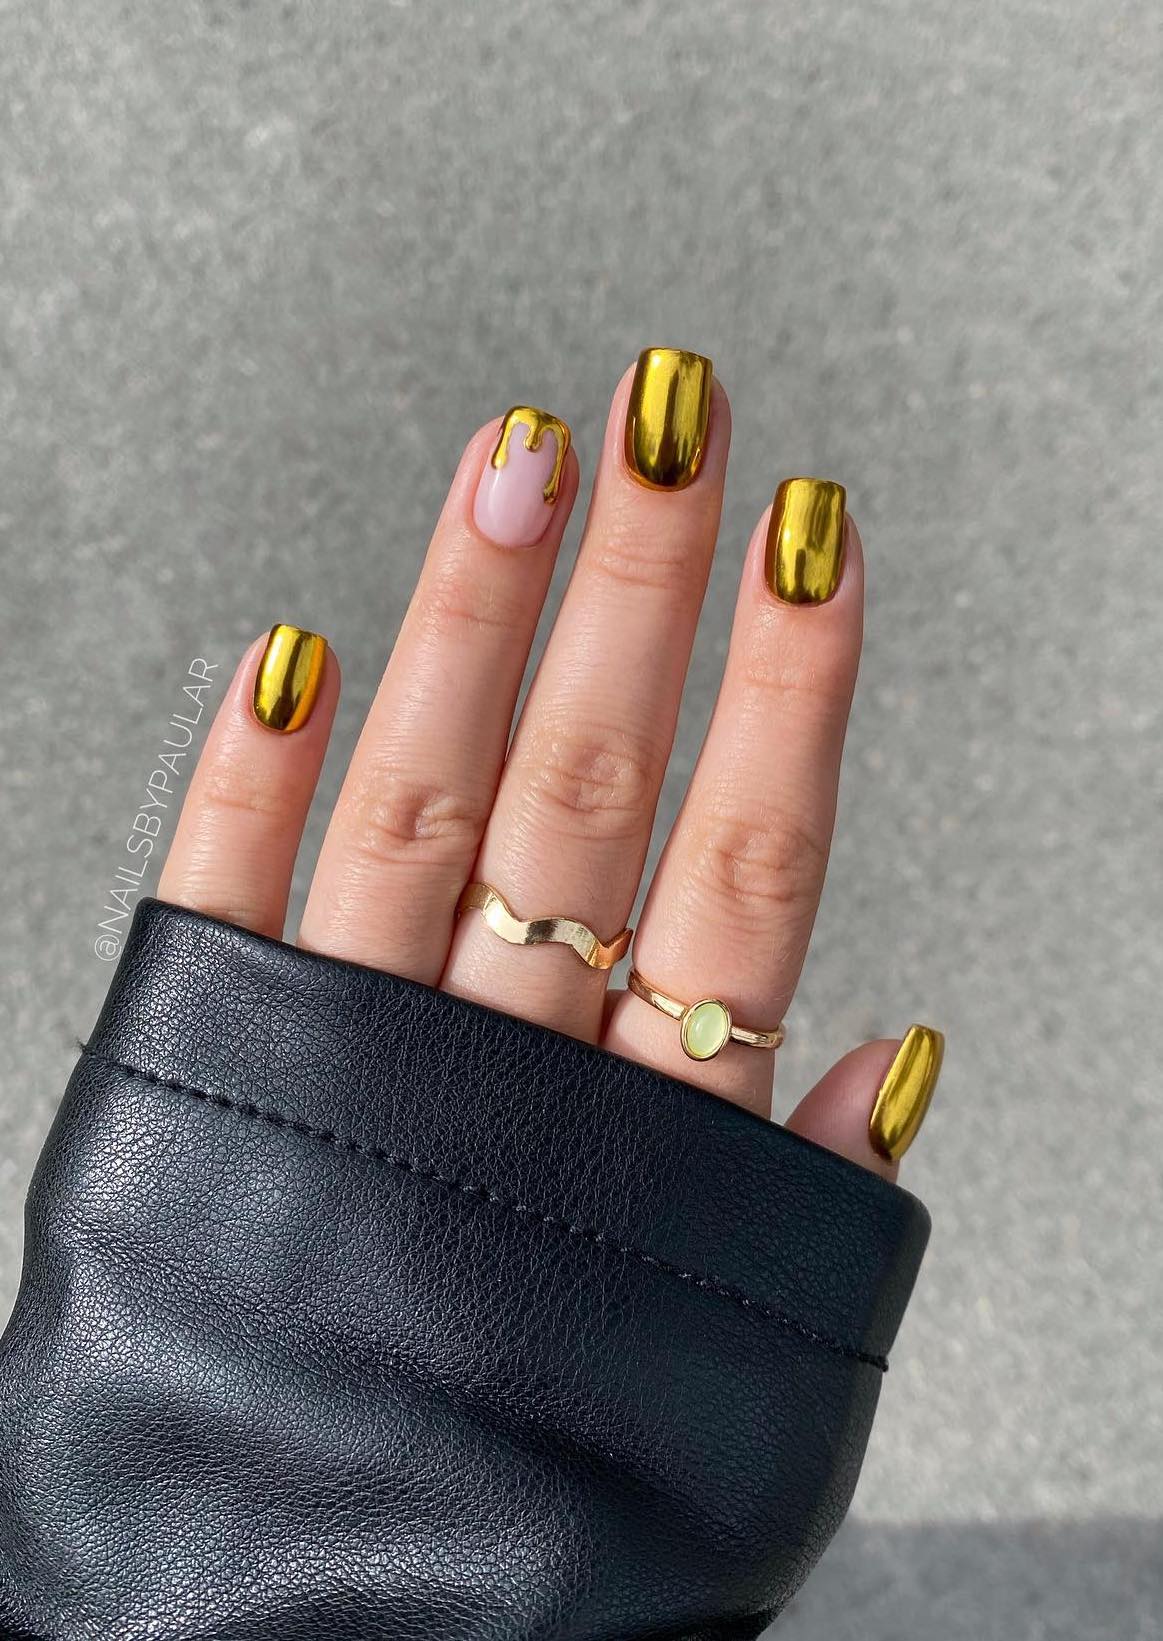 25 Gold Nails That Add Elegance To Your Look